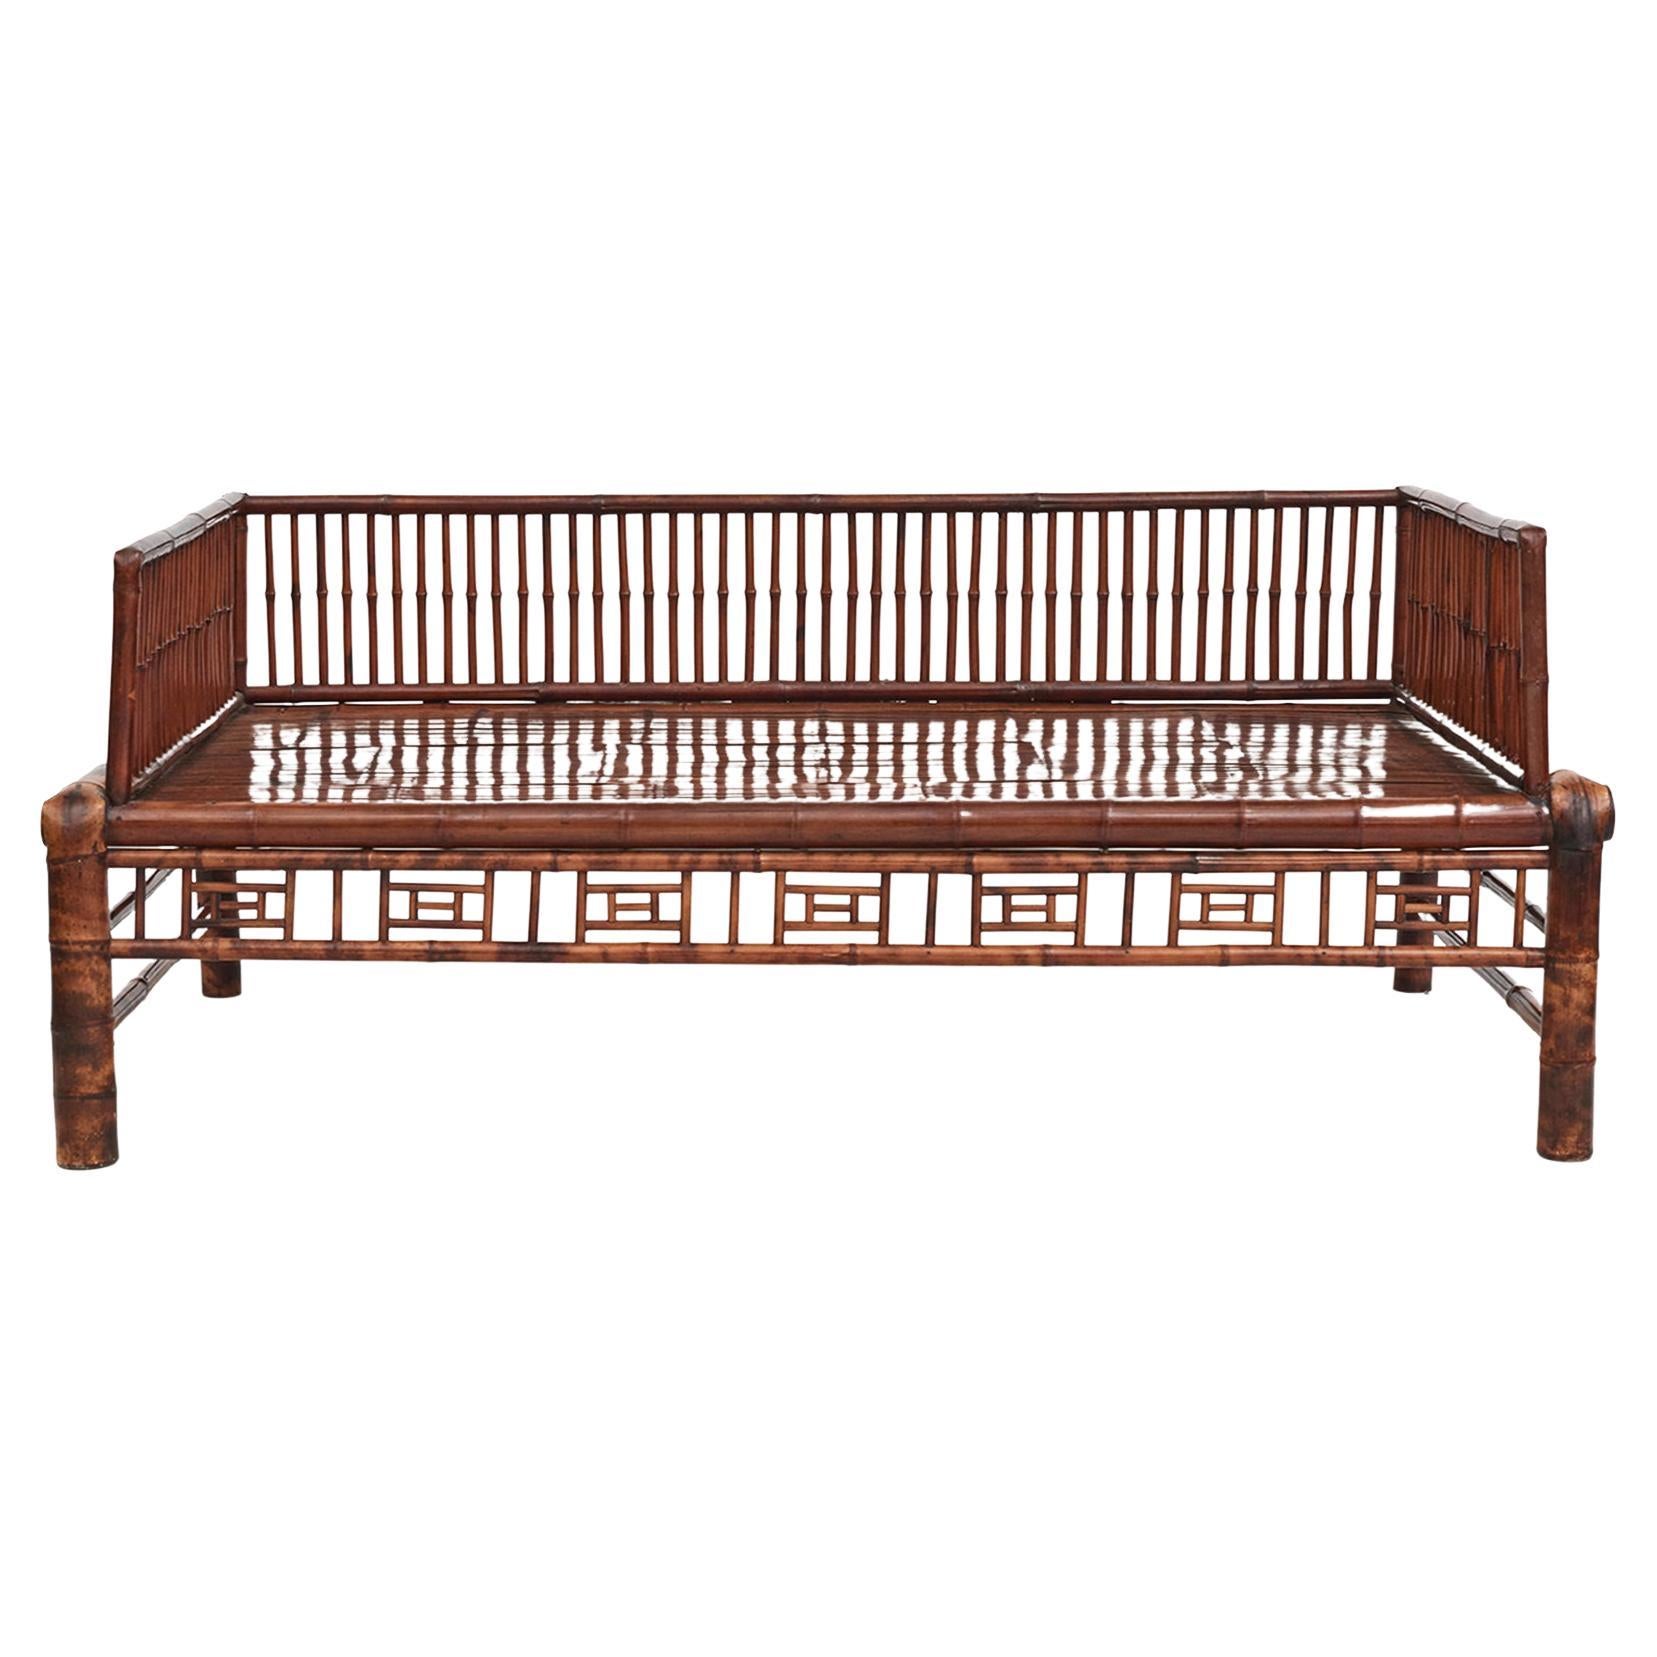 Chinese Daybed "Tiger bamboo"